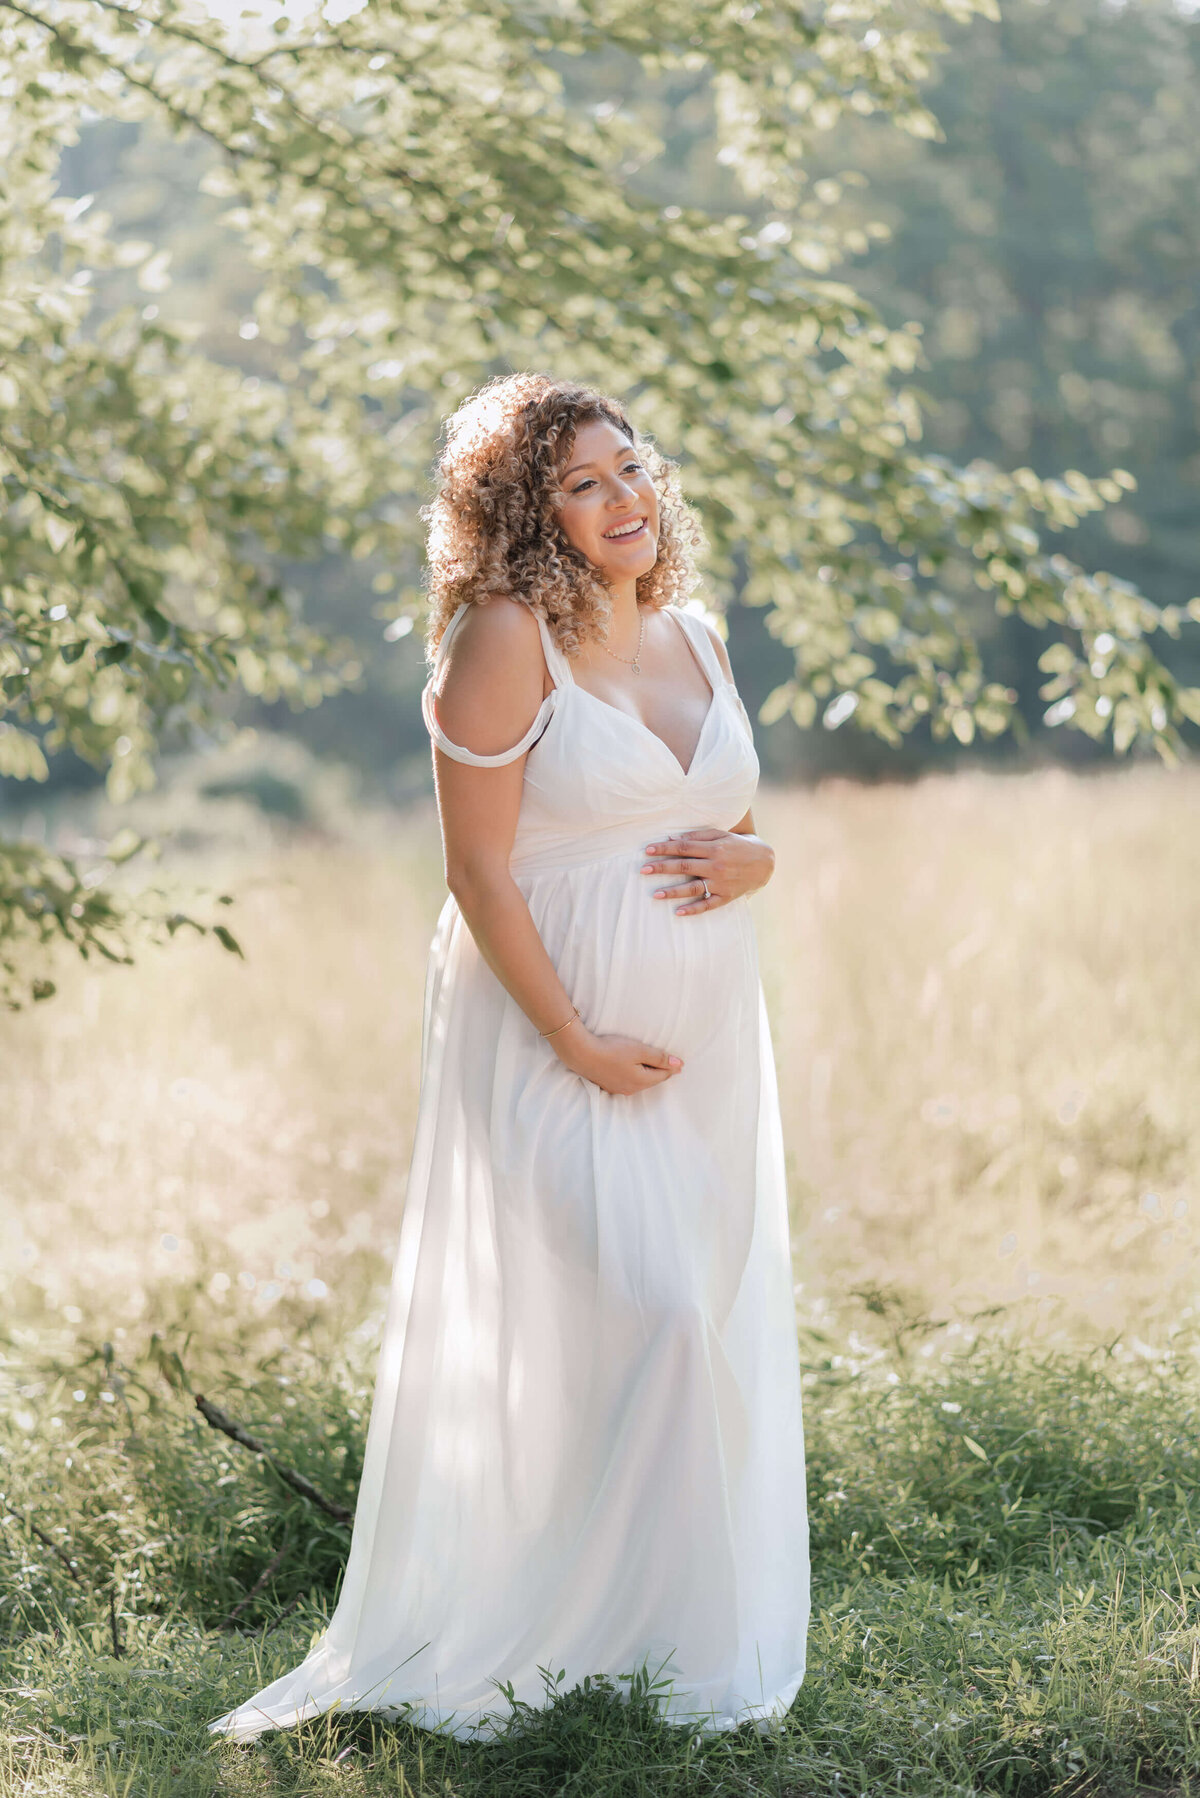 angelical mom wearing a long white maternity dress, smiling under a tree on a sunny summer day